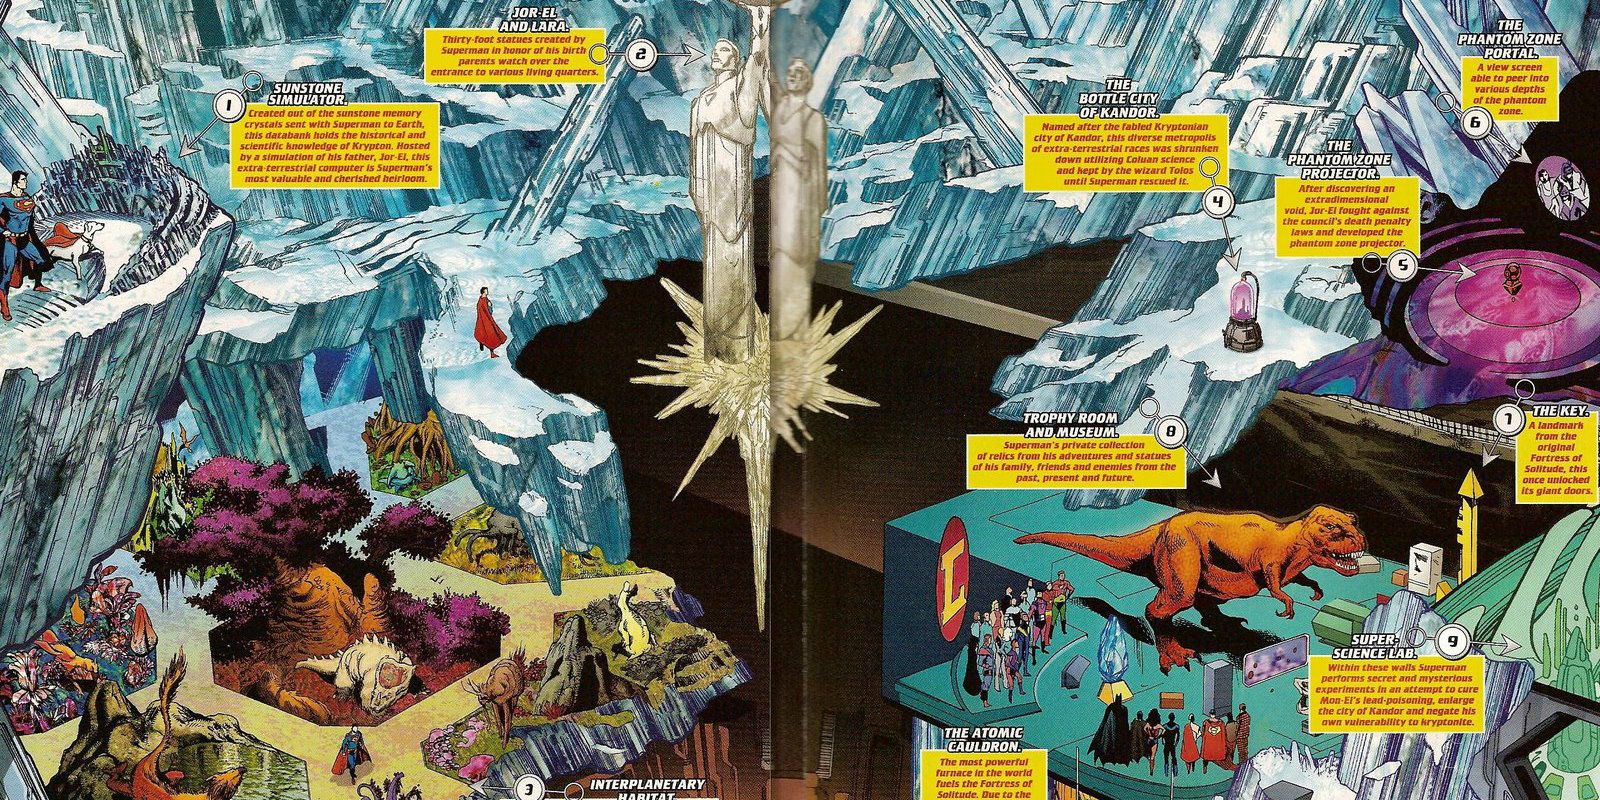 Top 10 Best Anime Series - Fortress of Solitude